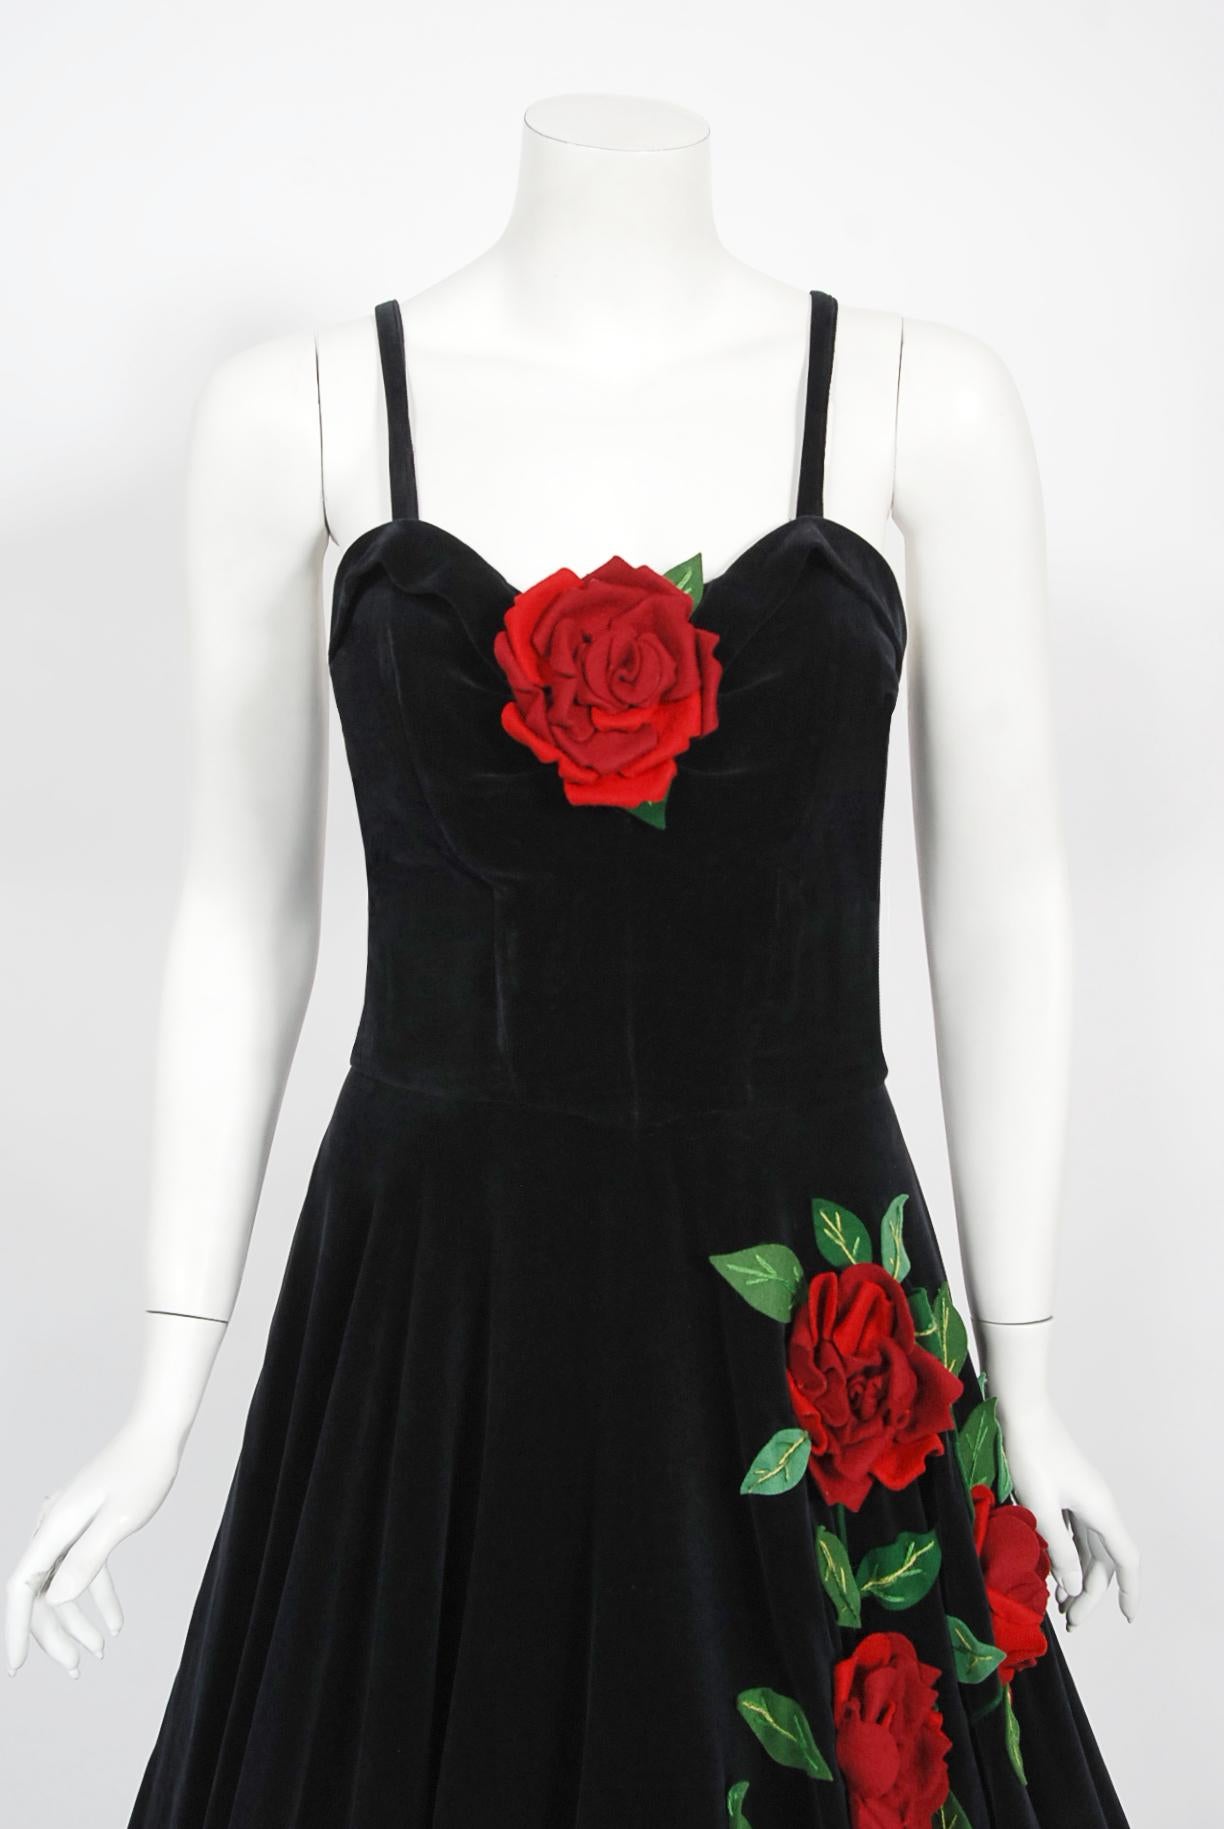 An absolutely stunning 1950's red roses floral appliqué black velvet dress from the iconic California couturier Juli Lynne Charlot. Not many people know Juli Lynne Charlot was an actress turned designer. In 1947, she designed a felt circle-skirt